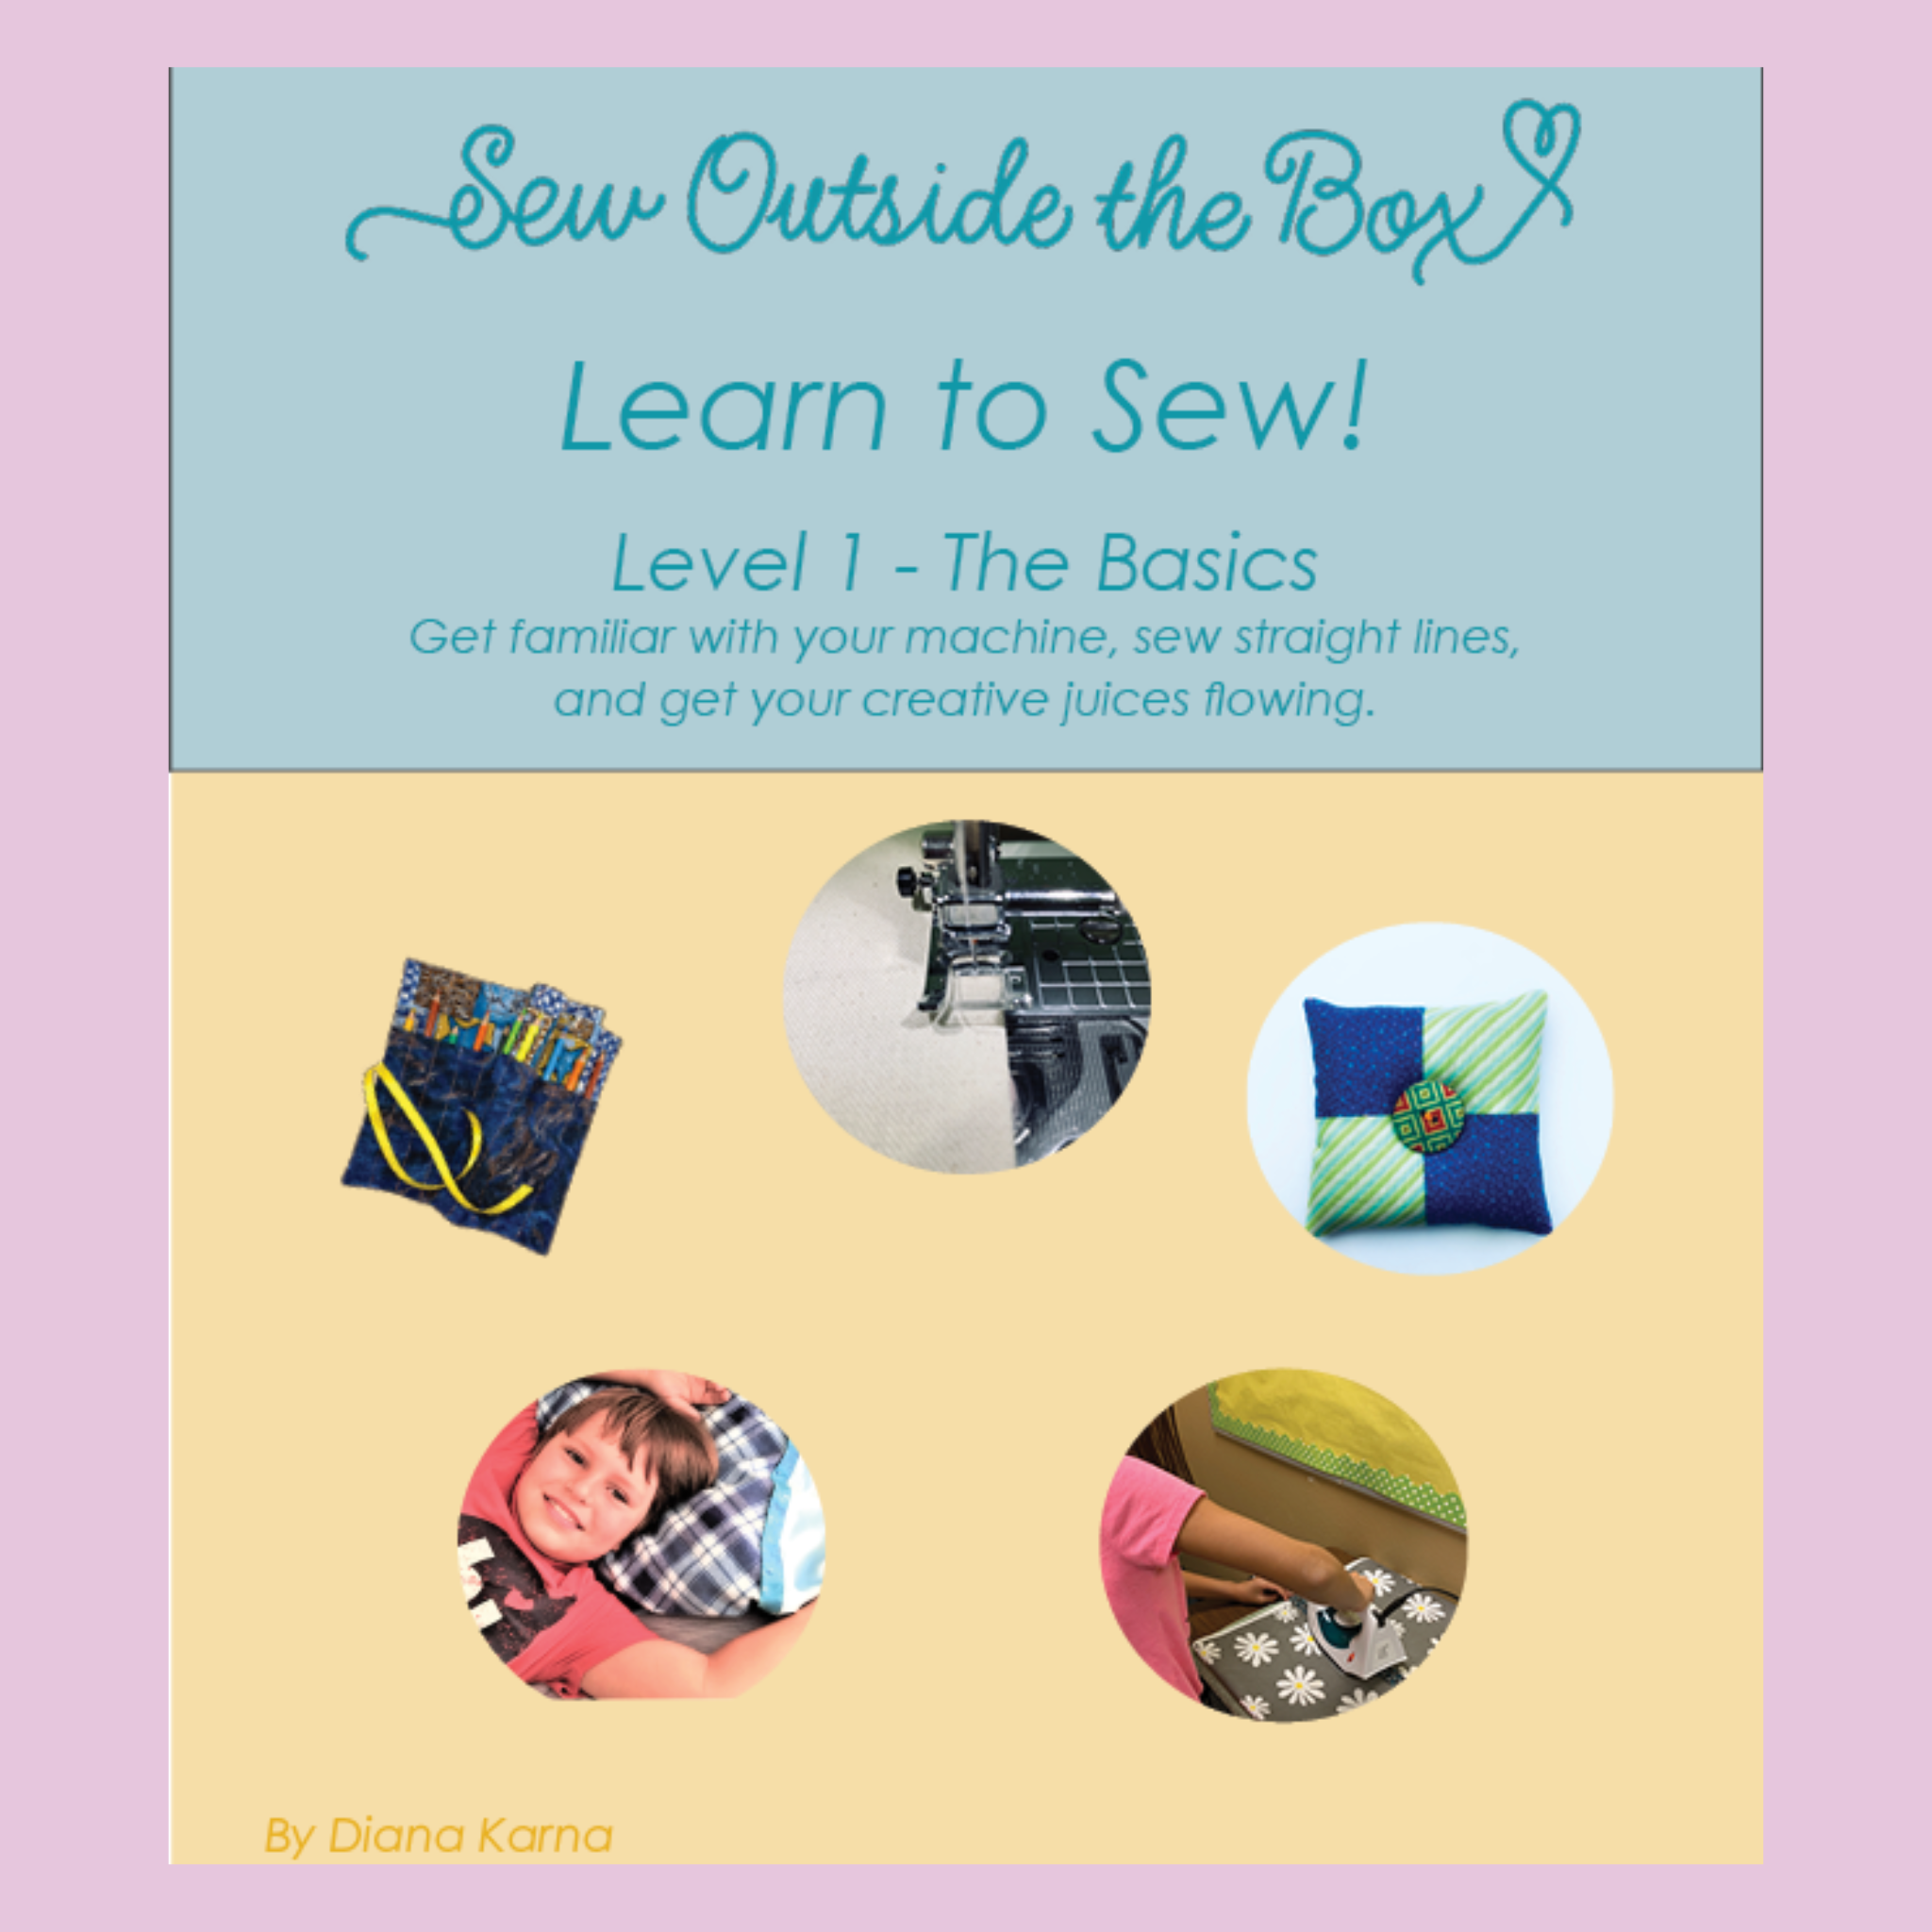 Learn to Sew - Level 1